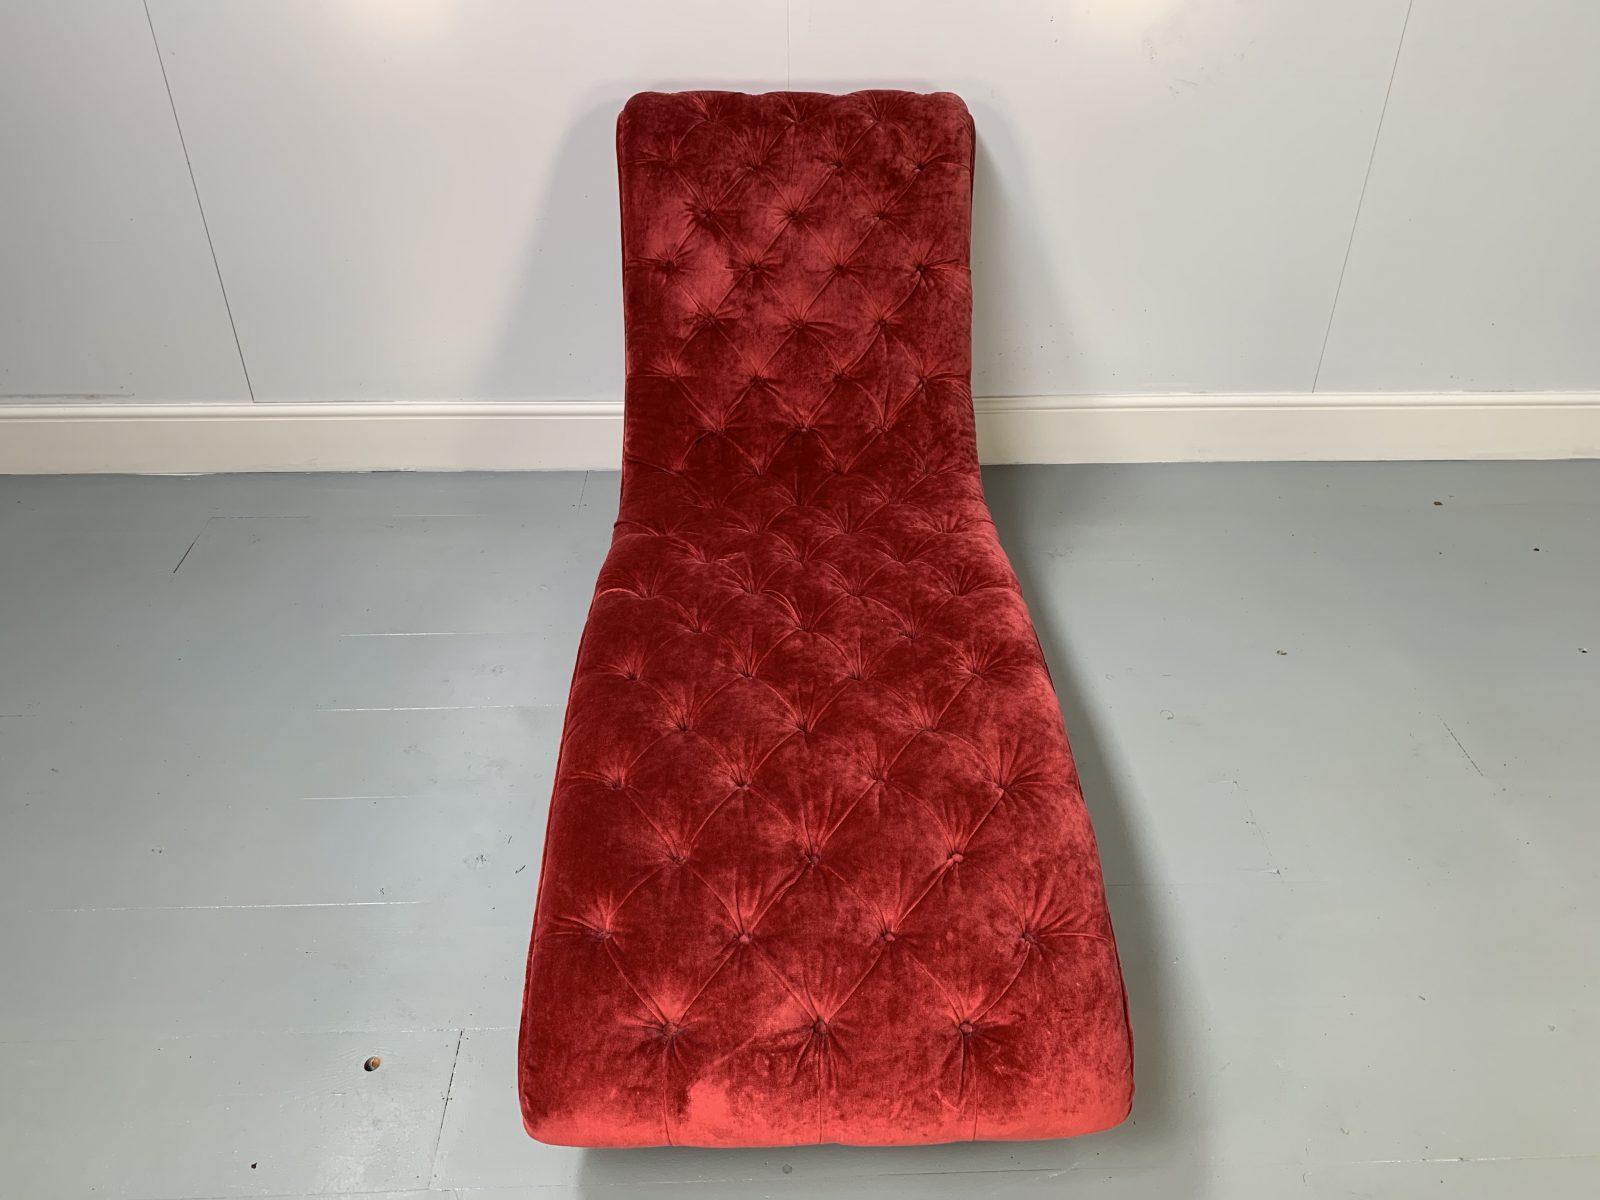 George Smith Chaise – “Brewster” – Chaise in Deep-Red Italian Velvet In Good Condition For Sale In Barrowford, GB